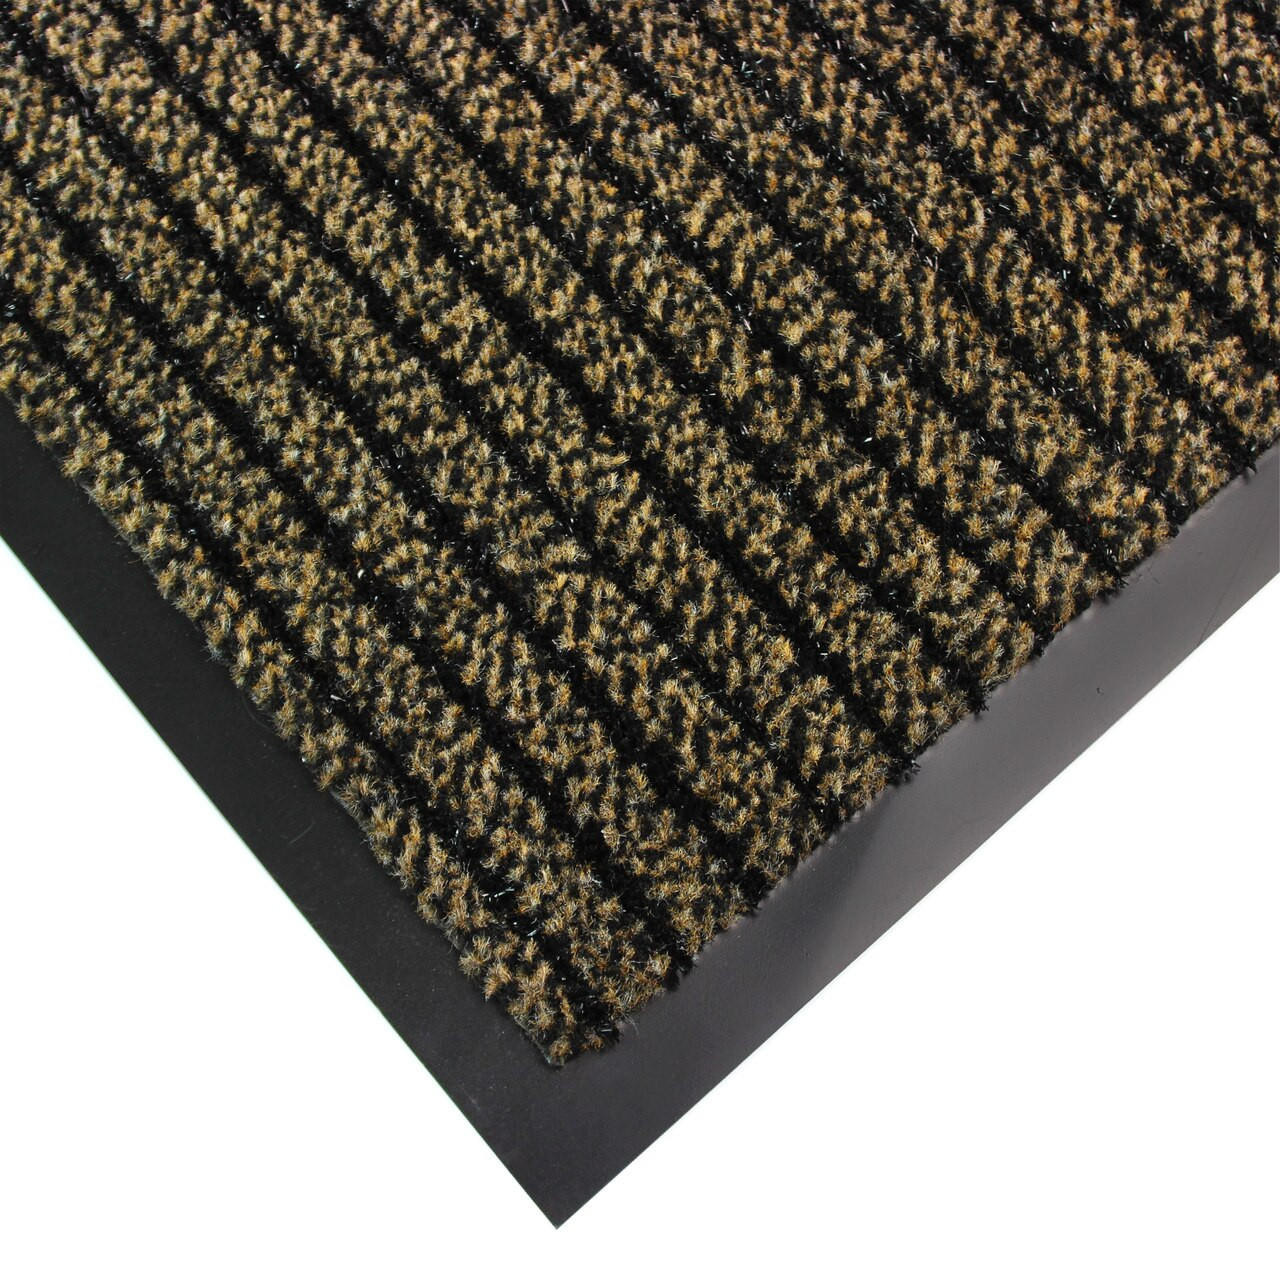 https://cdn11.bigcommerce.com/s-fjwps1jbkv/images/stencil/1280x1280/products/149/3930/ultralux-scraper-entrance-mat-or-polypropylene-fibers-and-anti-slip-vinyl-backed-indoor-entry-rug-doormat-or-brown__91212.1689079305.jpg?c=2?imbypass=on